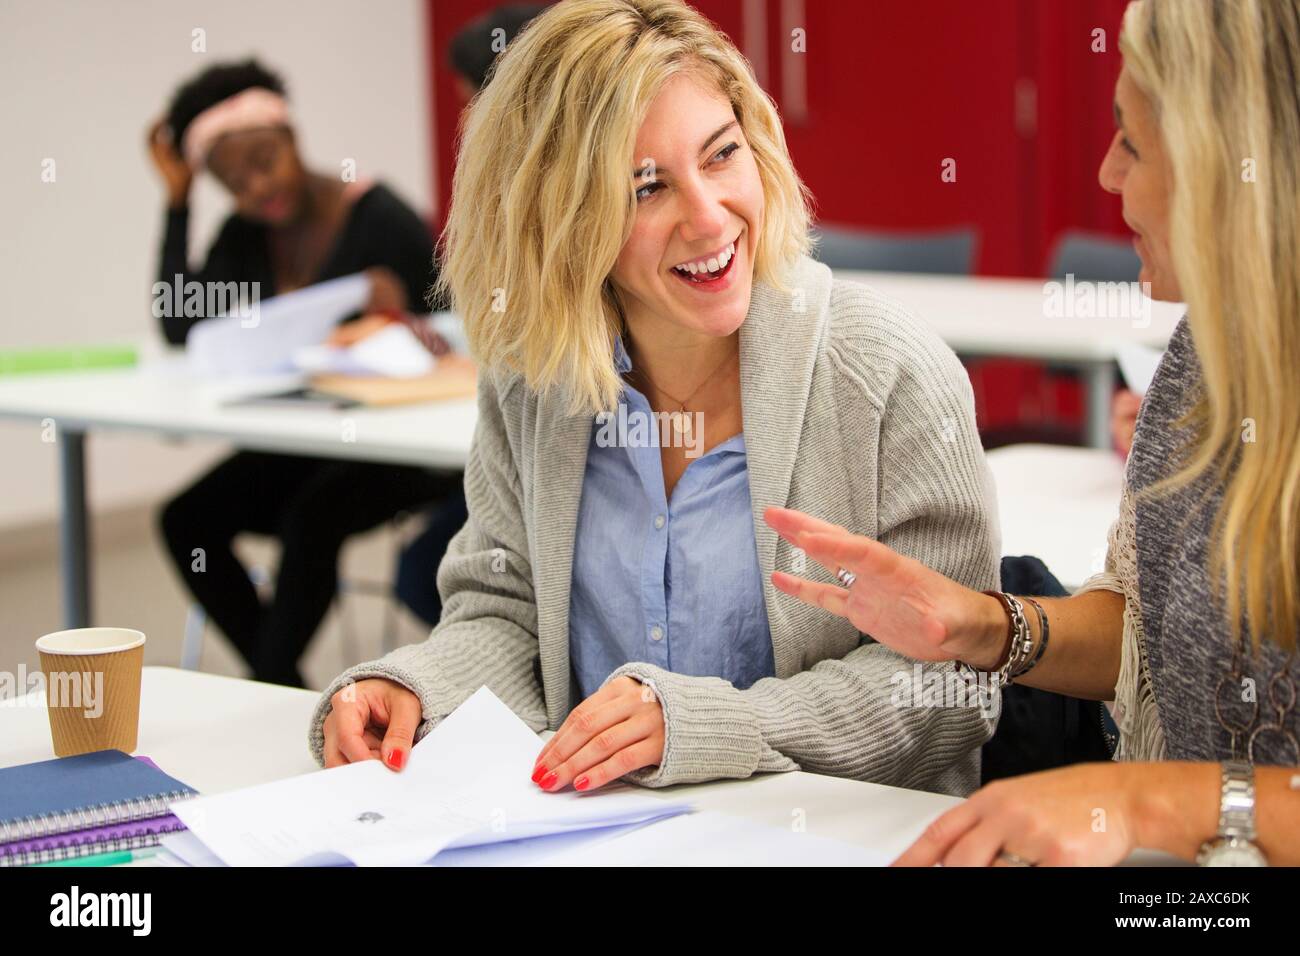 Female community college students talking, studying in classroom Stock Photo